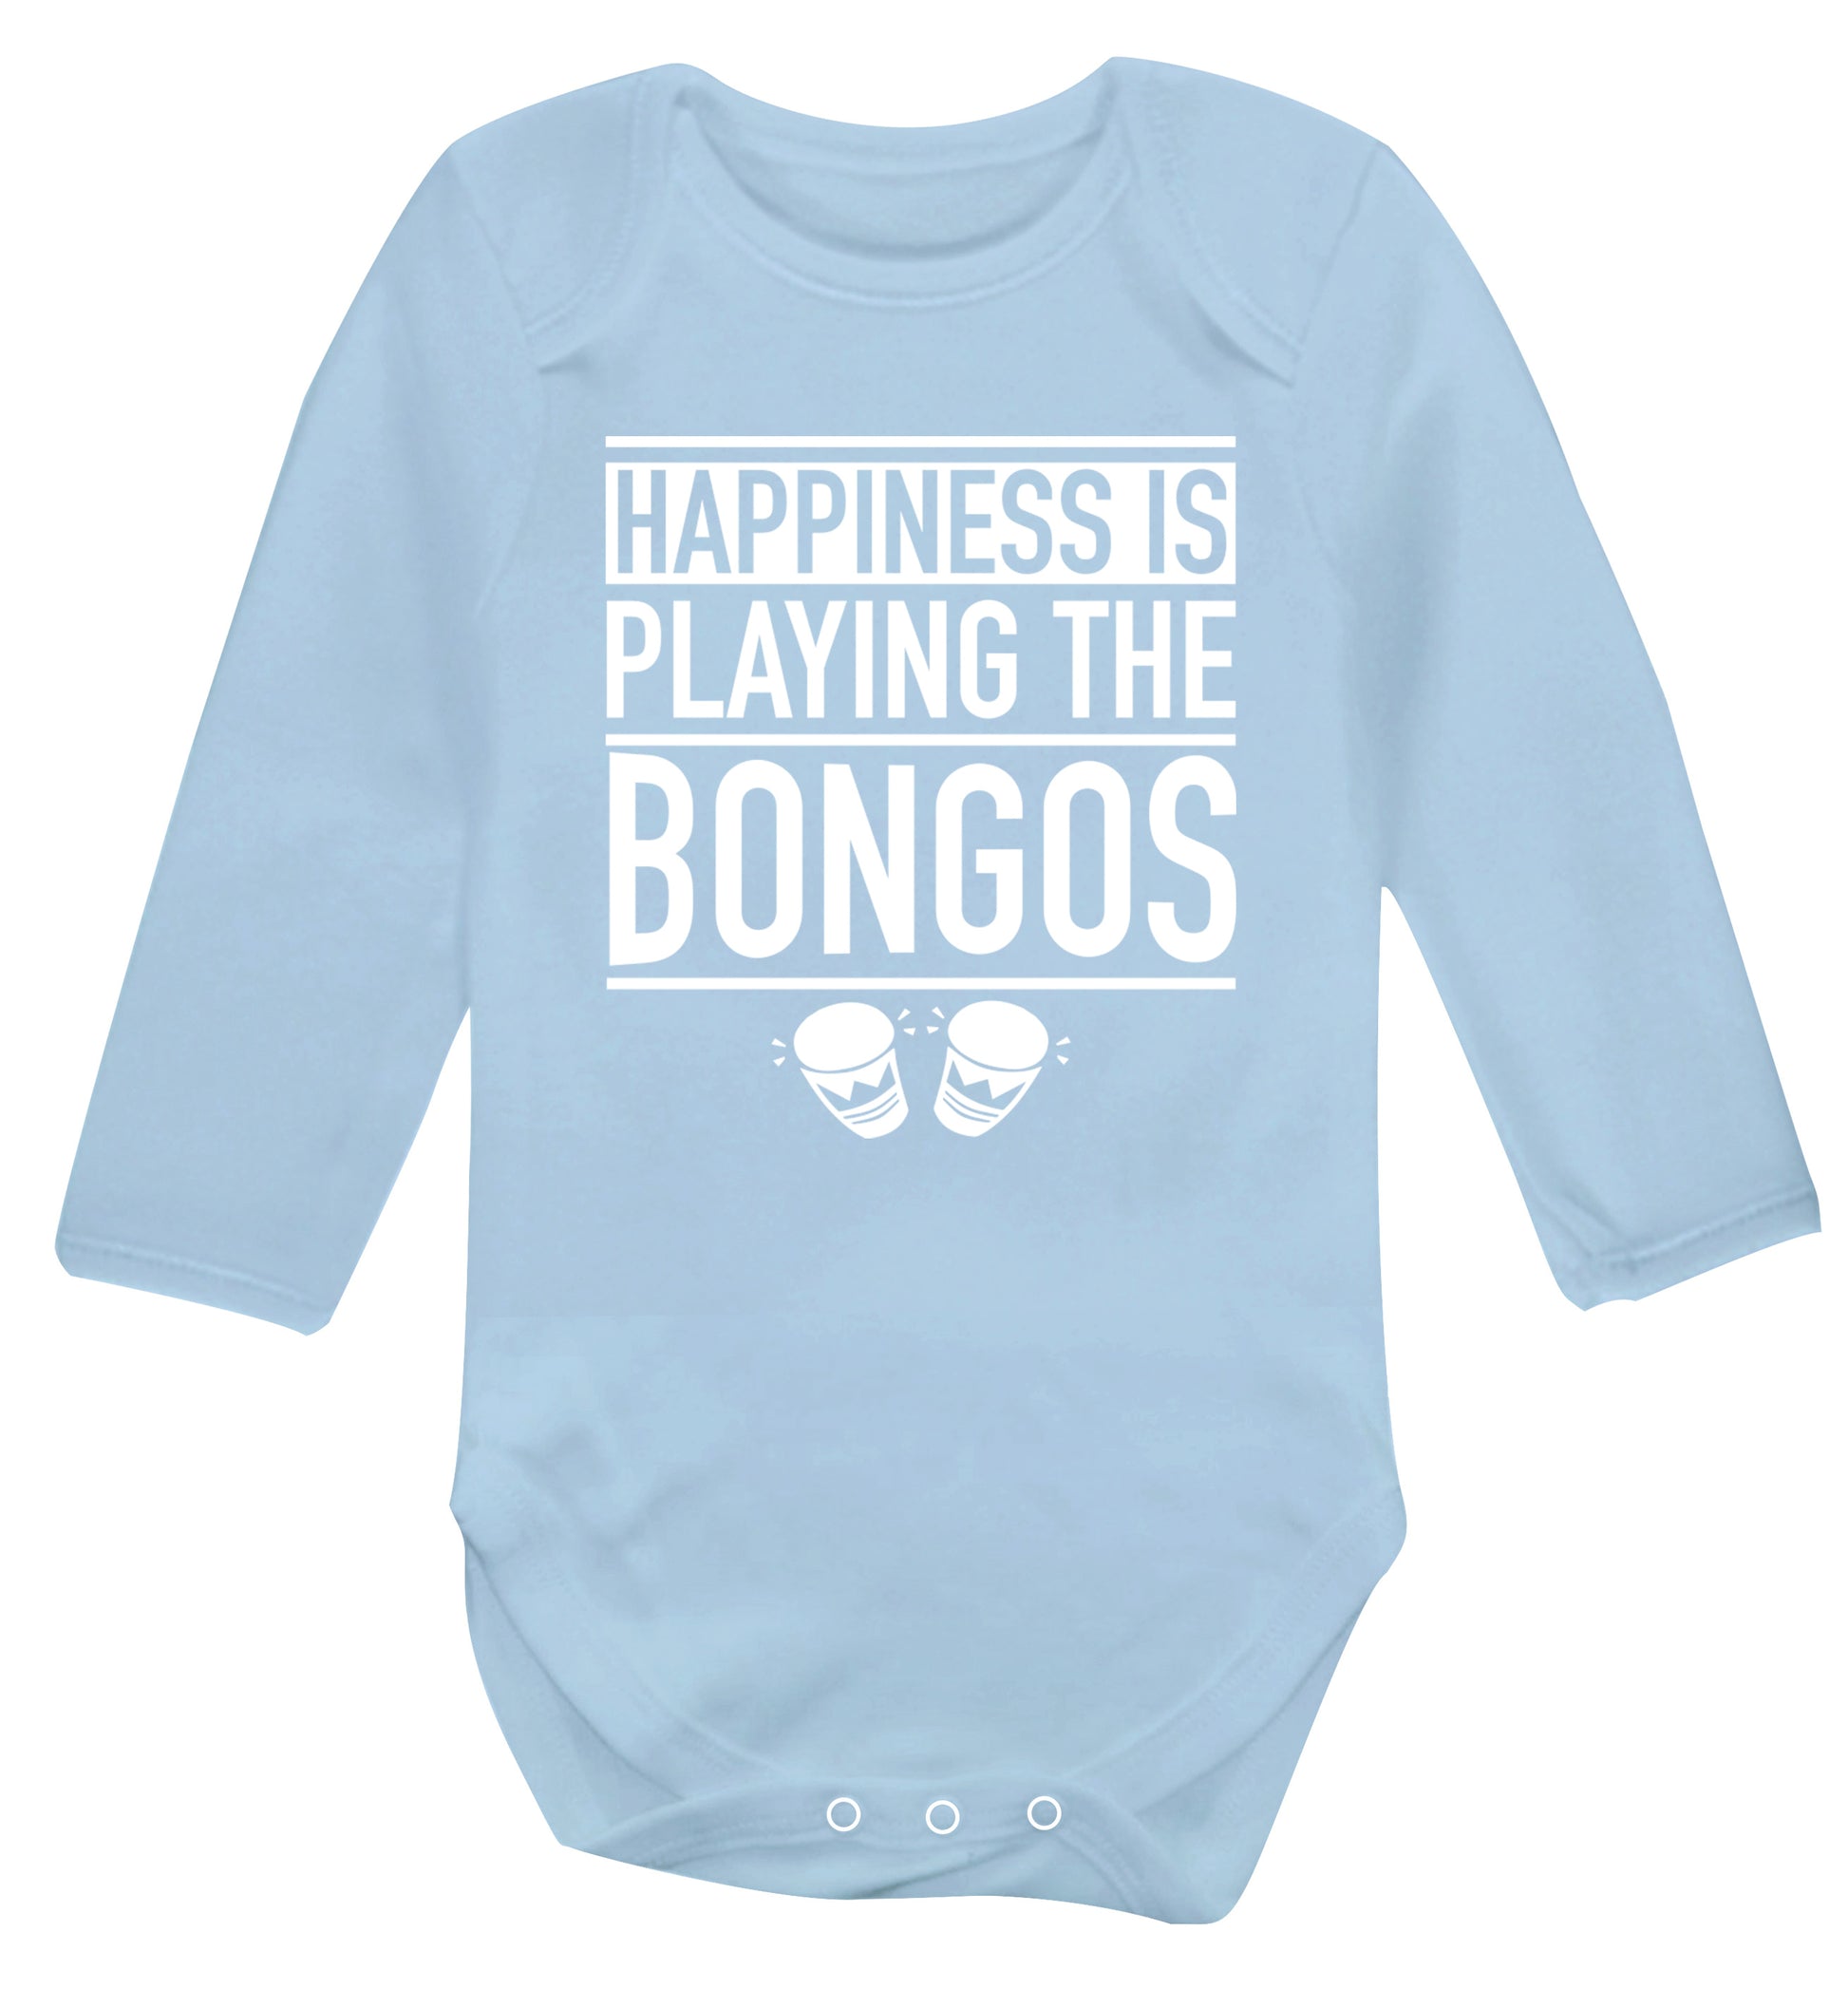 Happiness is playing the bongos Baby Vest long sleeved pale blue 6-12 months